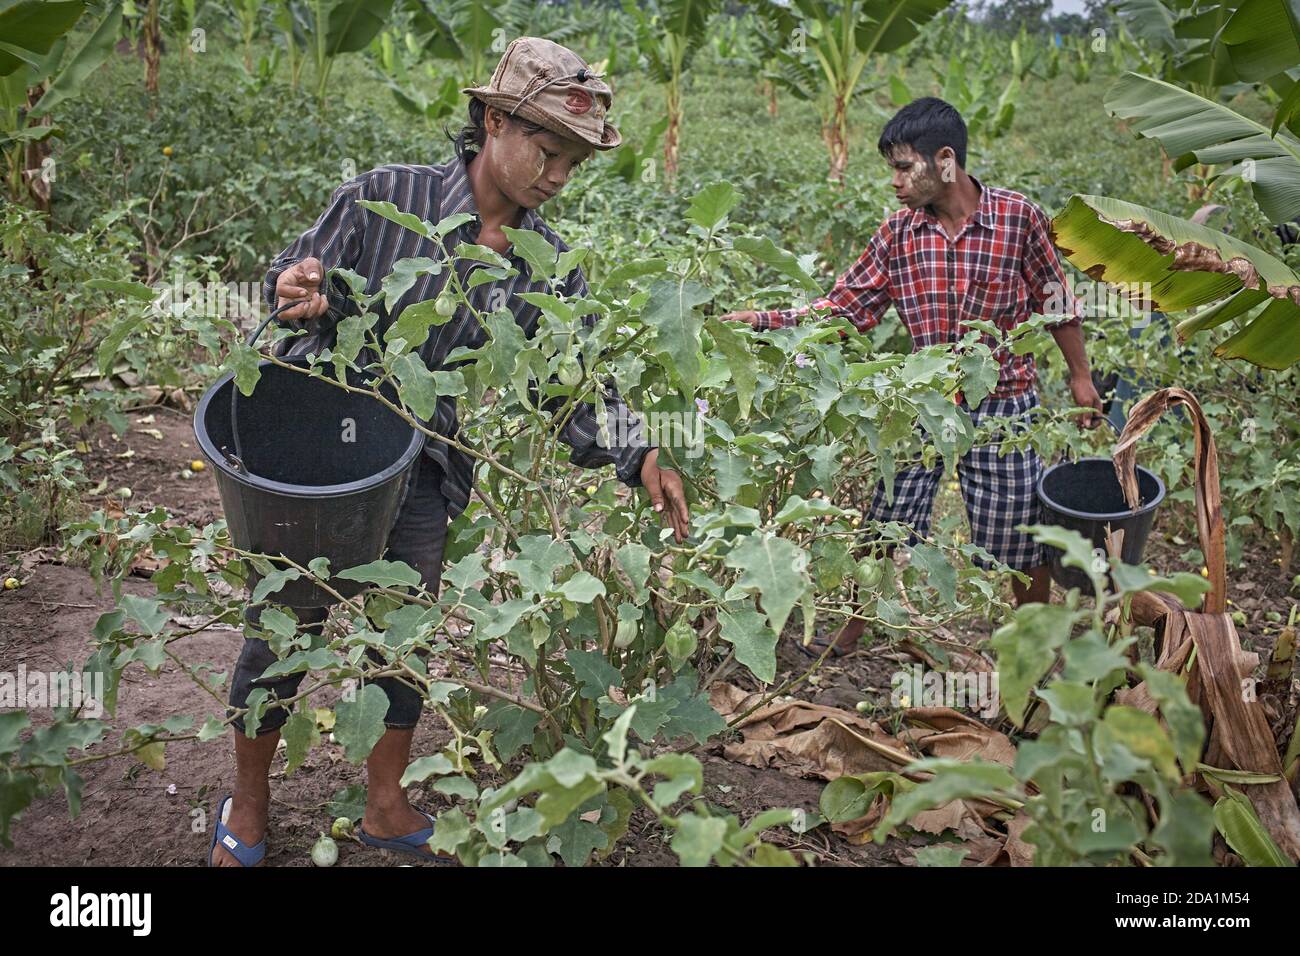 Mae Sot, Thailand. April 2012. Burmese refugees working as fruit pickers in the countryside. Stock Photo